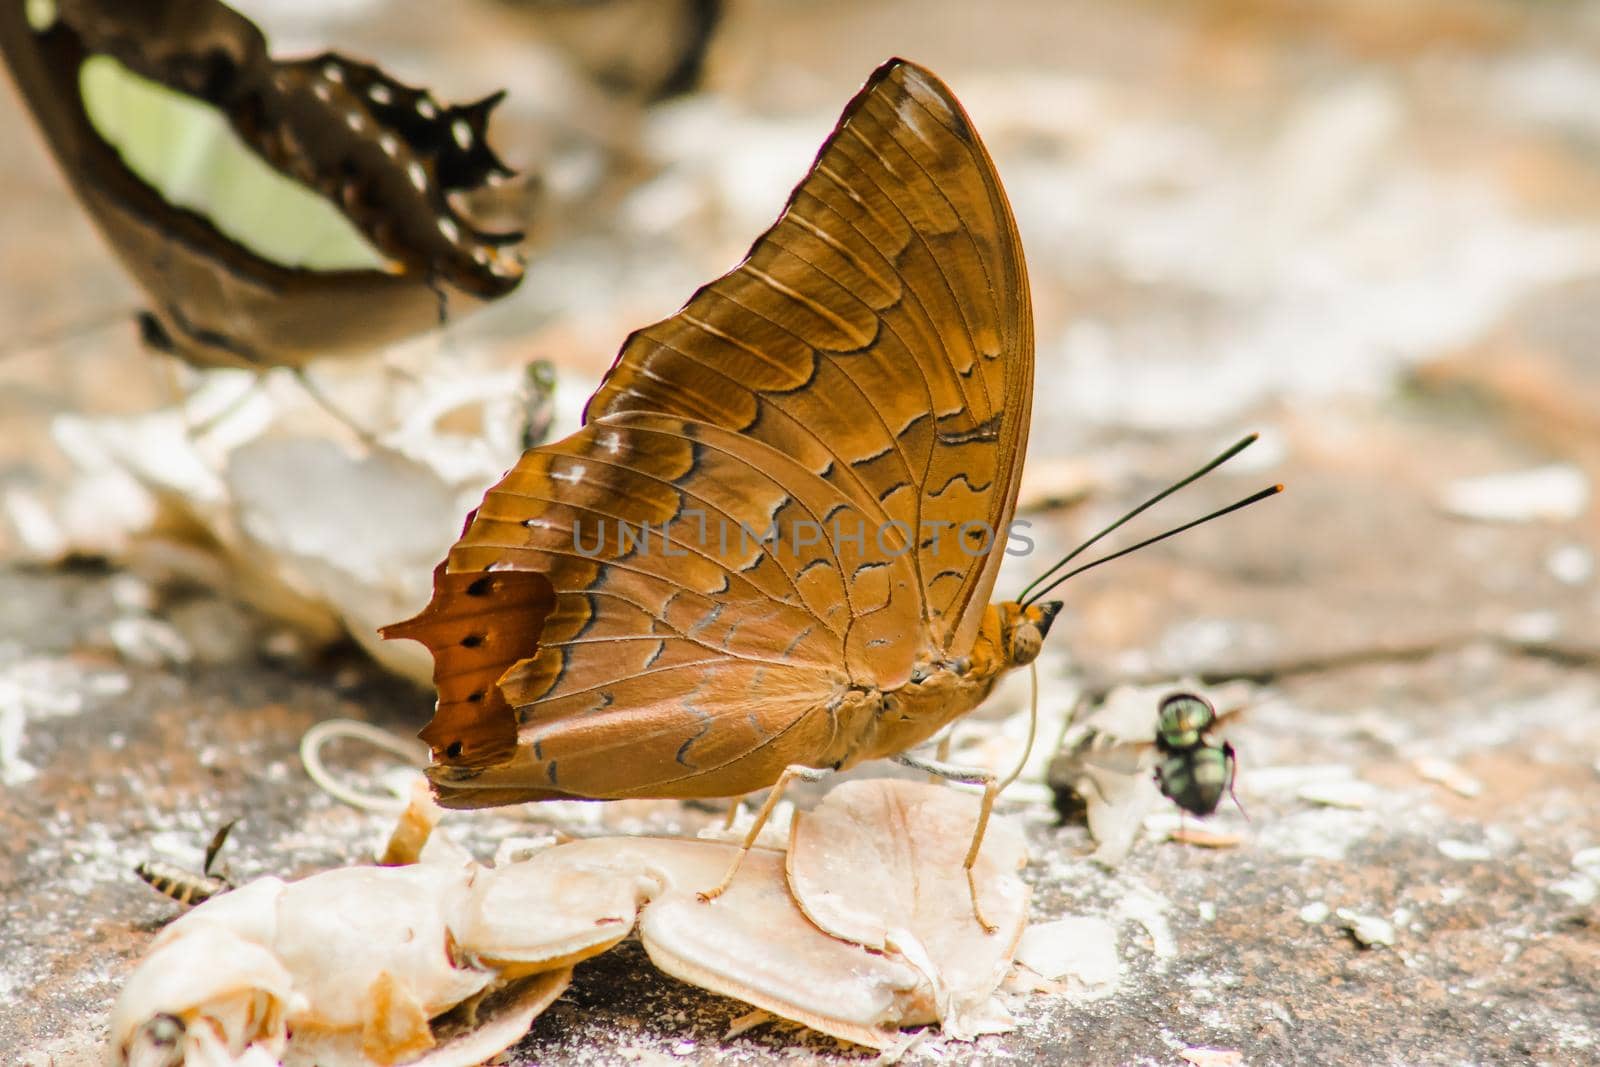 (Common Cruiser) Family name: Family of tassel-leg butterflies (Nymphalidae) on the rocky ground by Puripatt